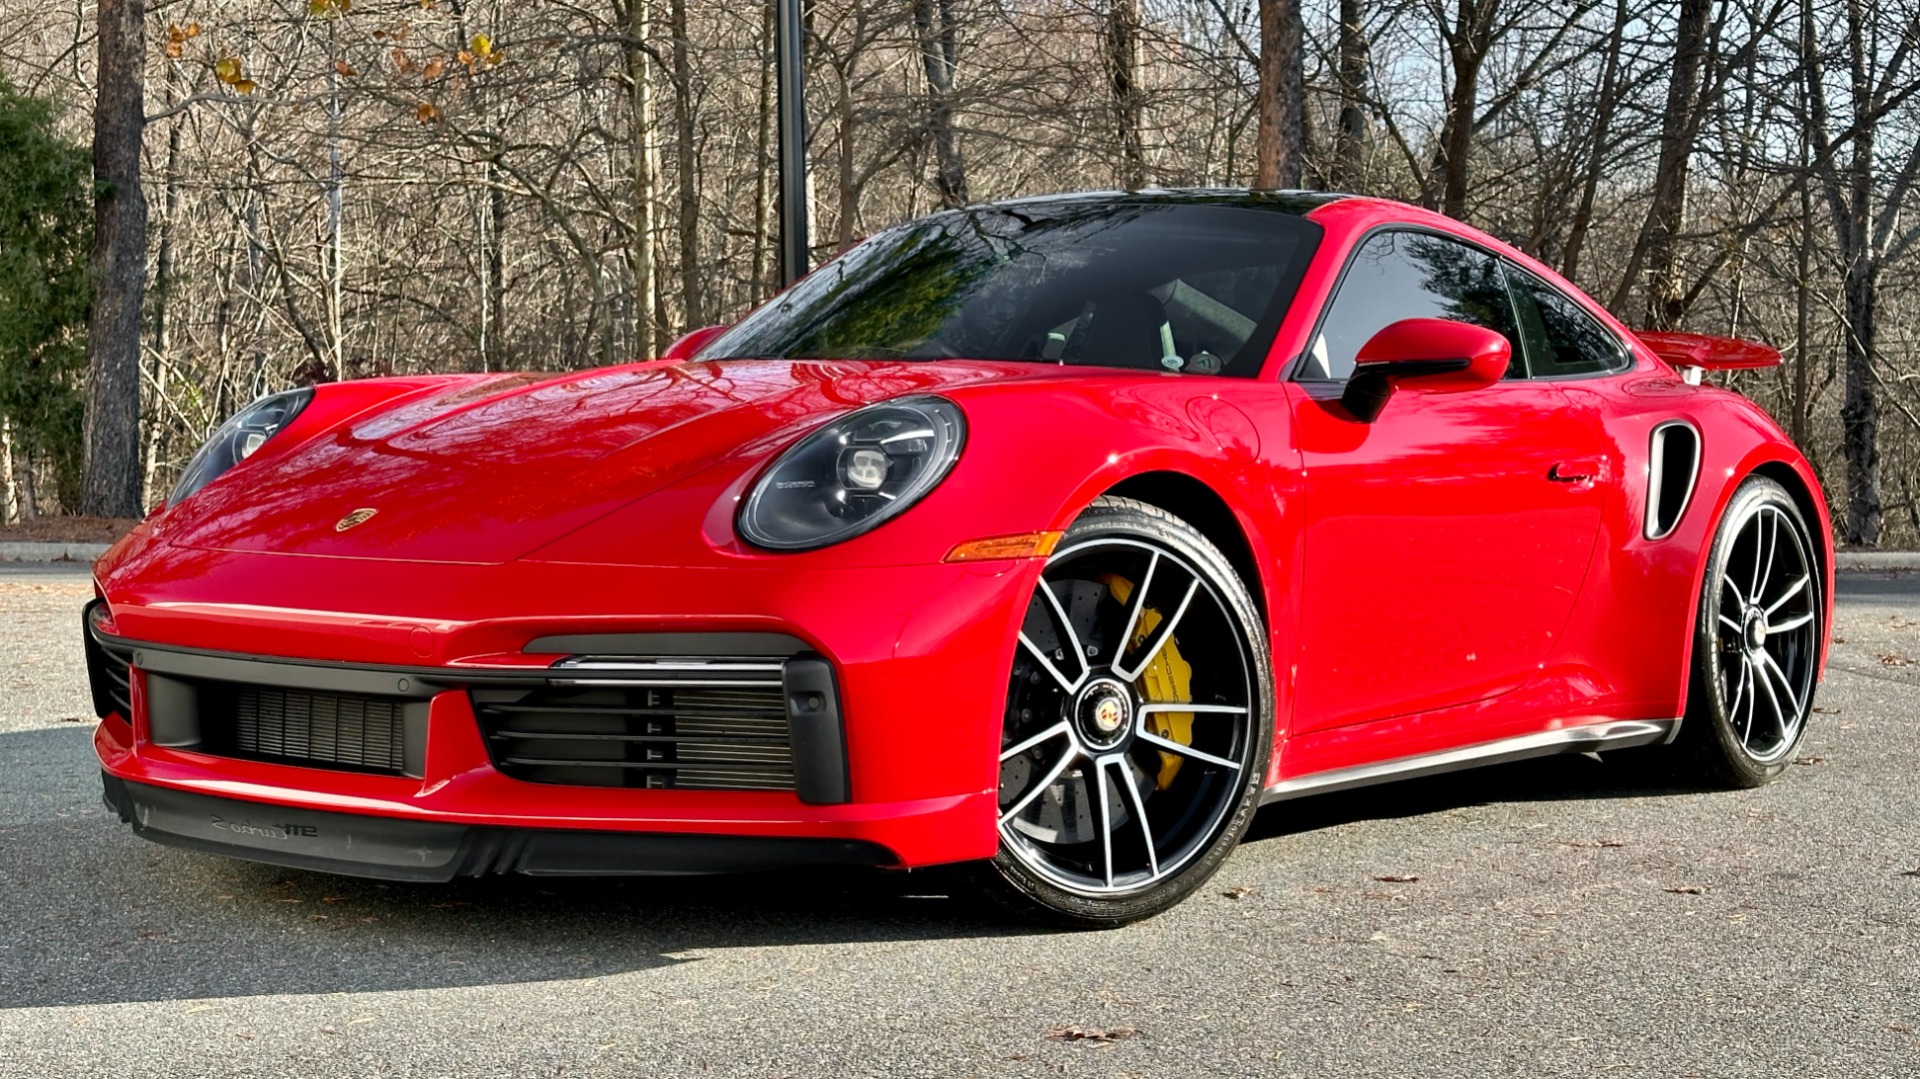 Used 2022 Porsche 911 Turbo S / PAINT PROTECTION / BURMESTER / SPORT EXHAUST / FRONT LIFT for sale $253,000 at Formula Imports in Charlotte NC 28227 1